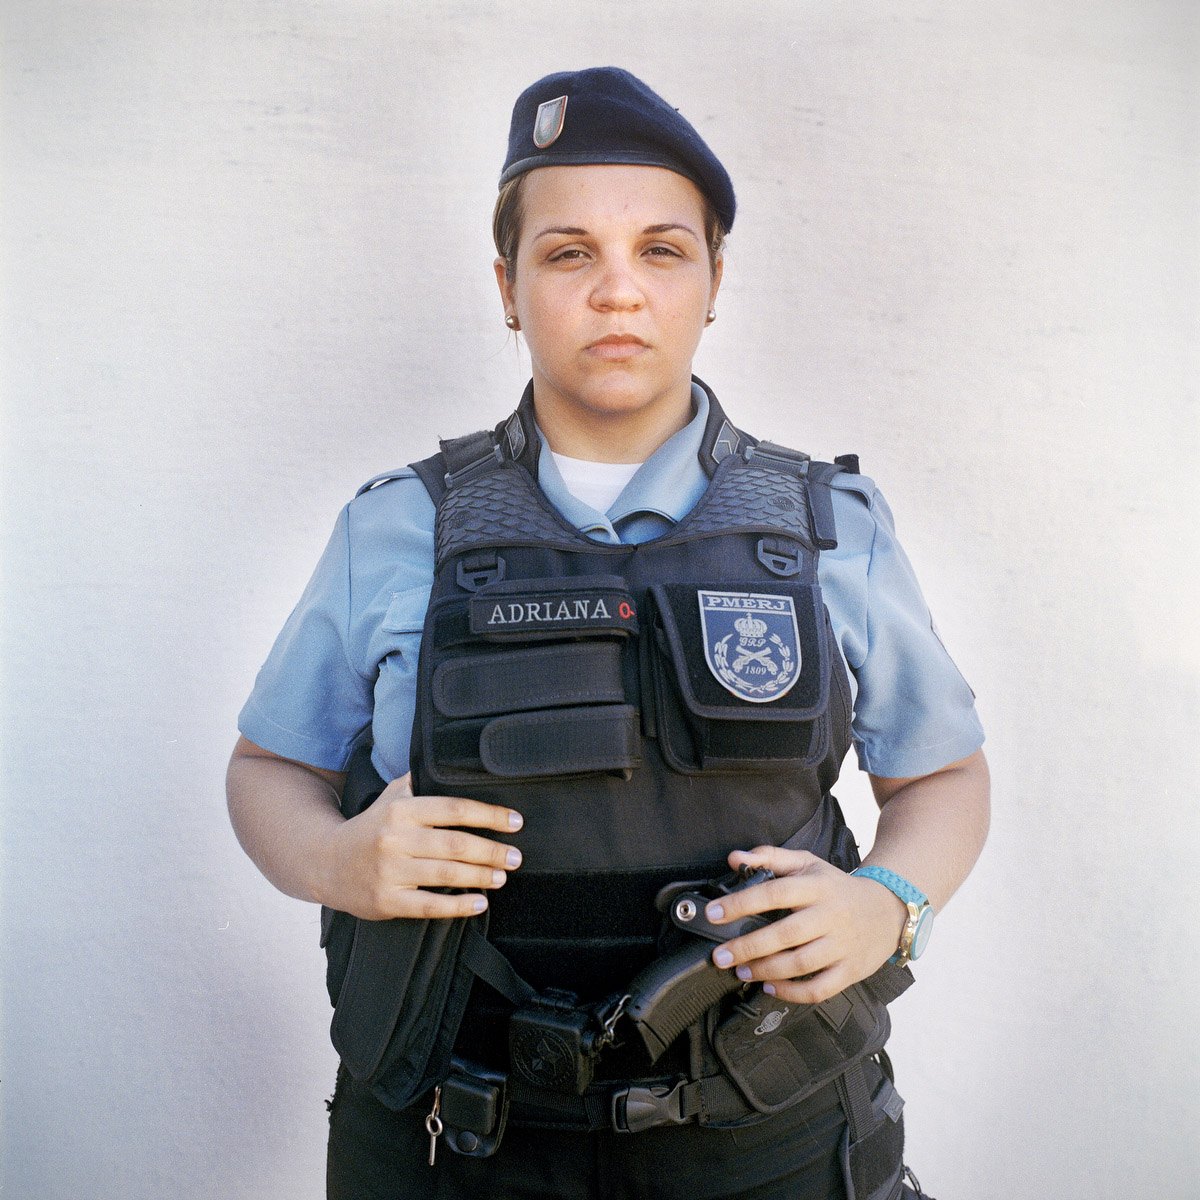 Patrol officer Adriana, with the Rapid Response Team of the Pacifying Police Unit (UPP), in Complexo do Caju, Rio de Janeiro, Brazil.